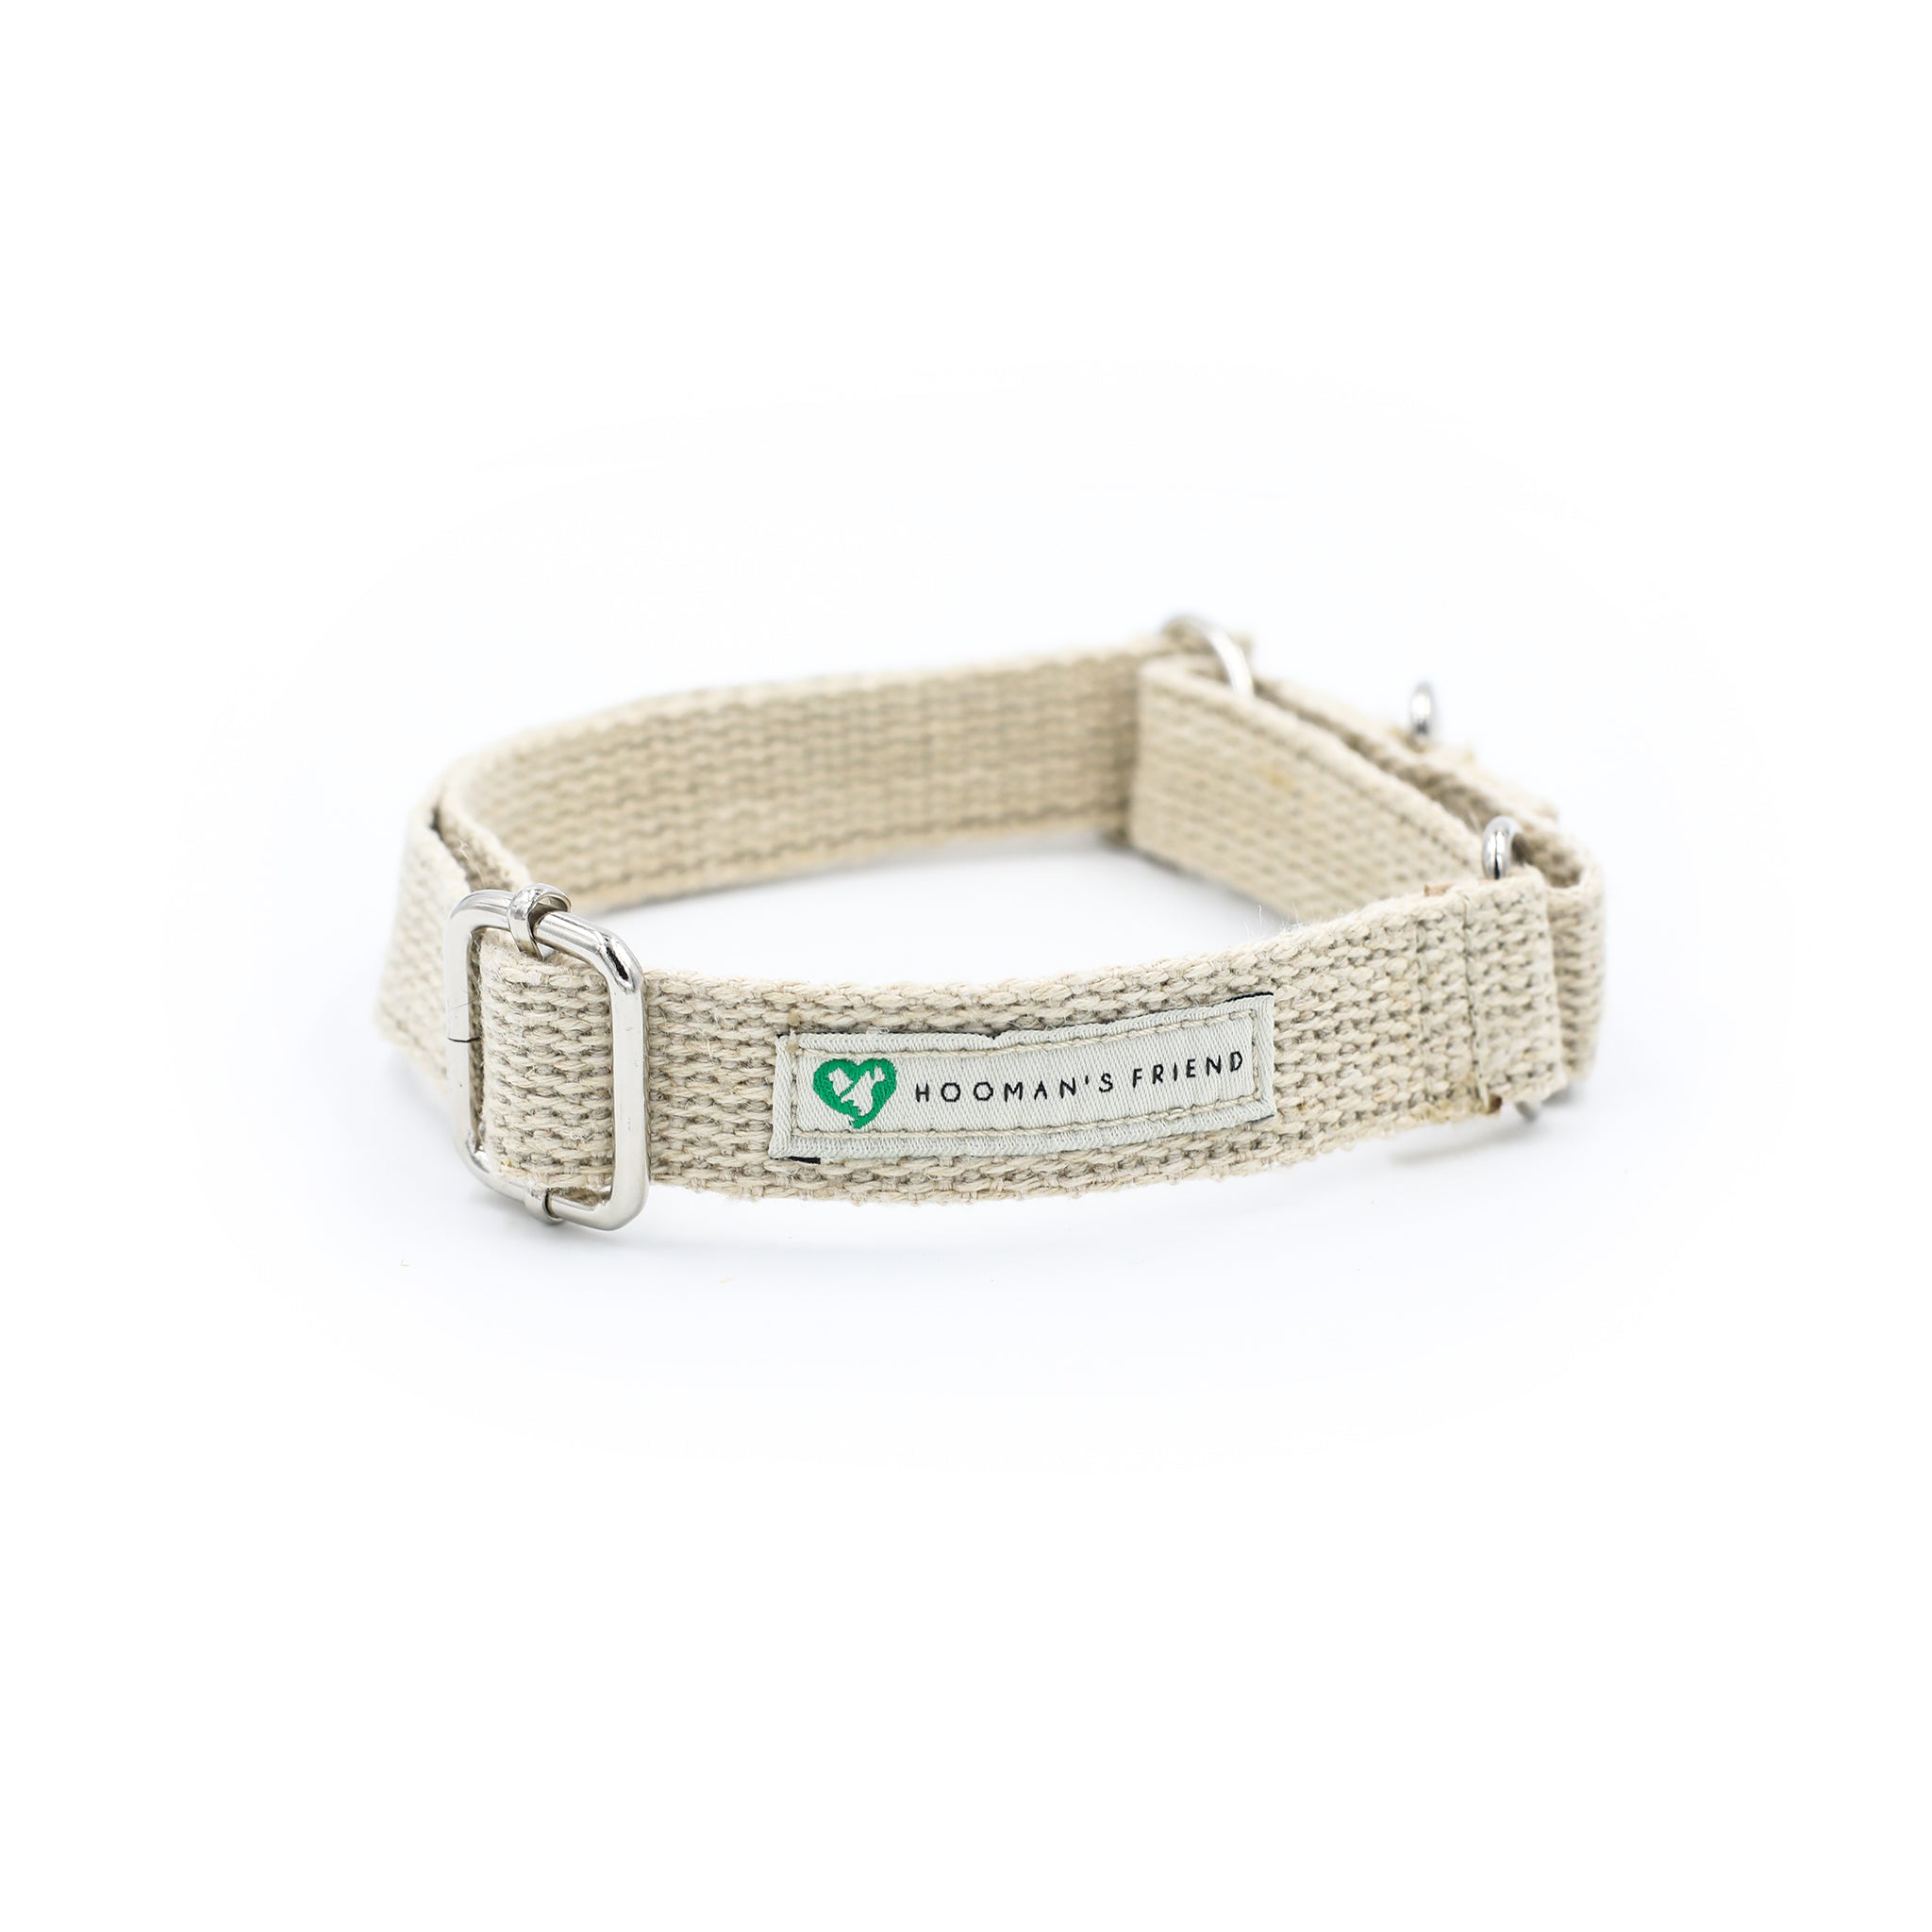 A Hoomans friends natural jute hemp martingale style collar. Placed upon a white background. The natural dog collar is facing so you can see the natural cotton logo This is a size medium.